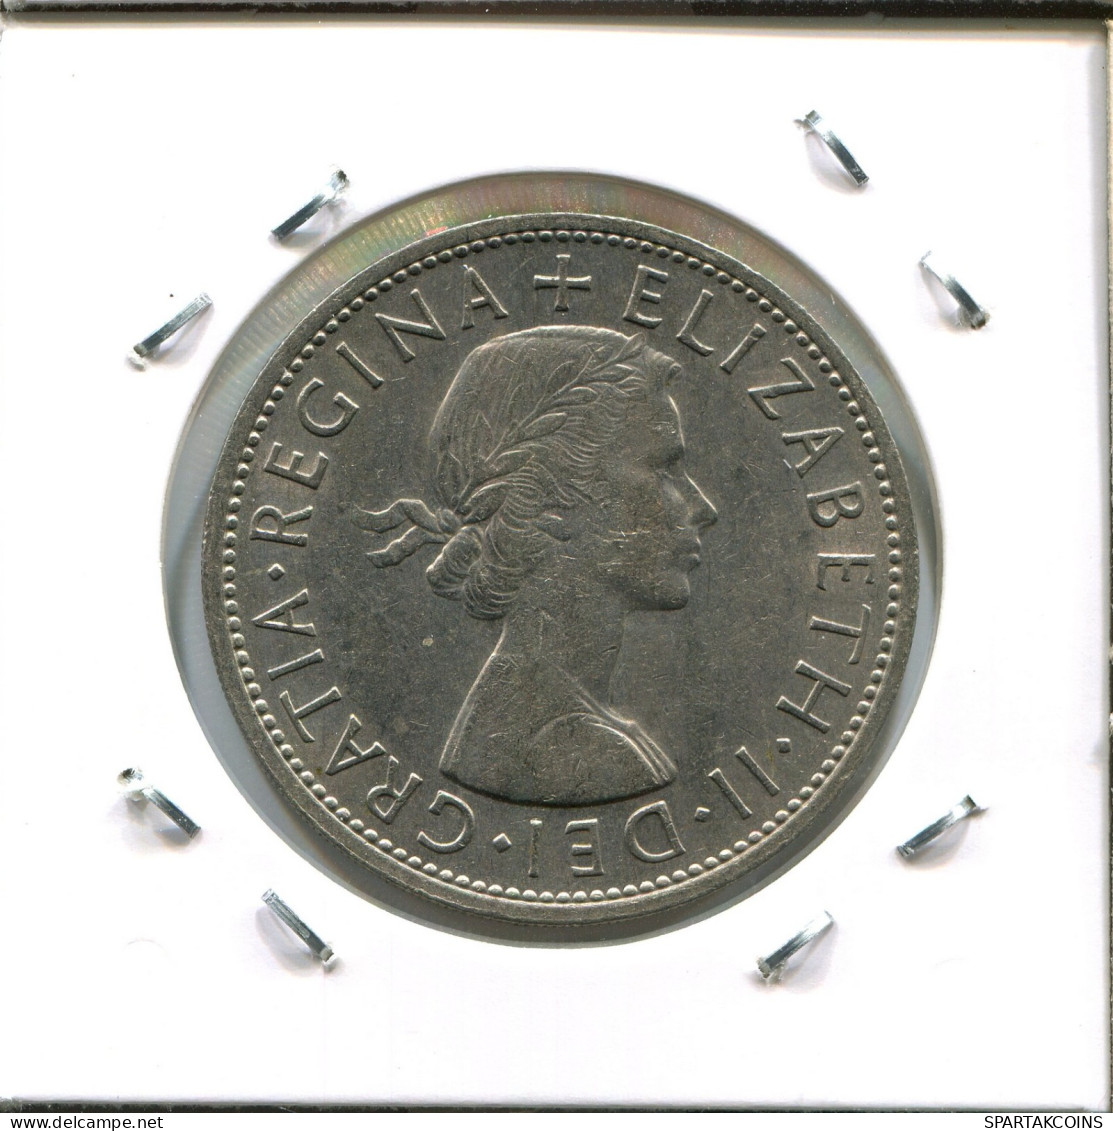 2 SHILLINGS 1961 UK GREAT BRITAIN Coin #AW541.U.A - J. 1 Florin / 2 Schillings